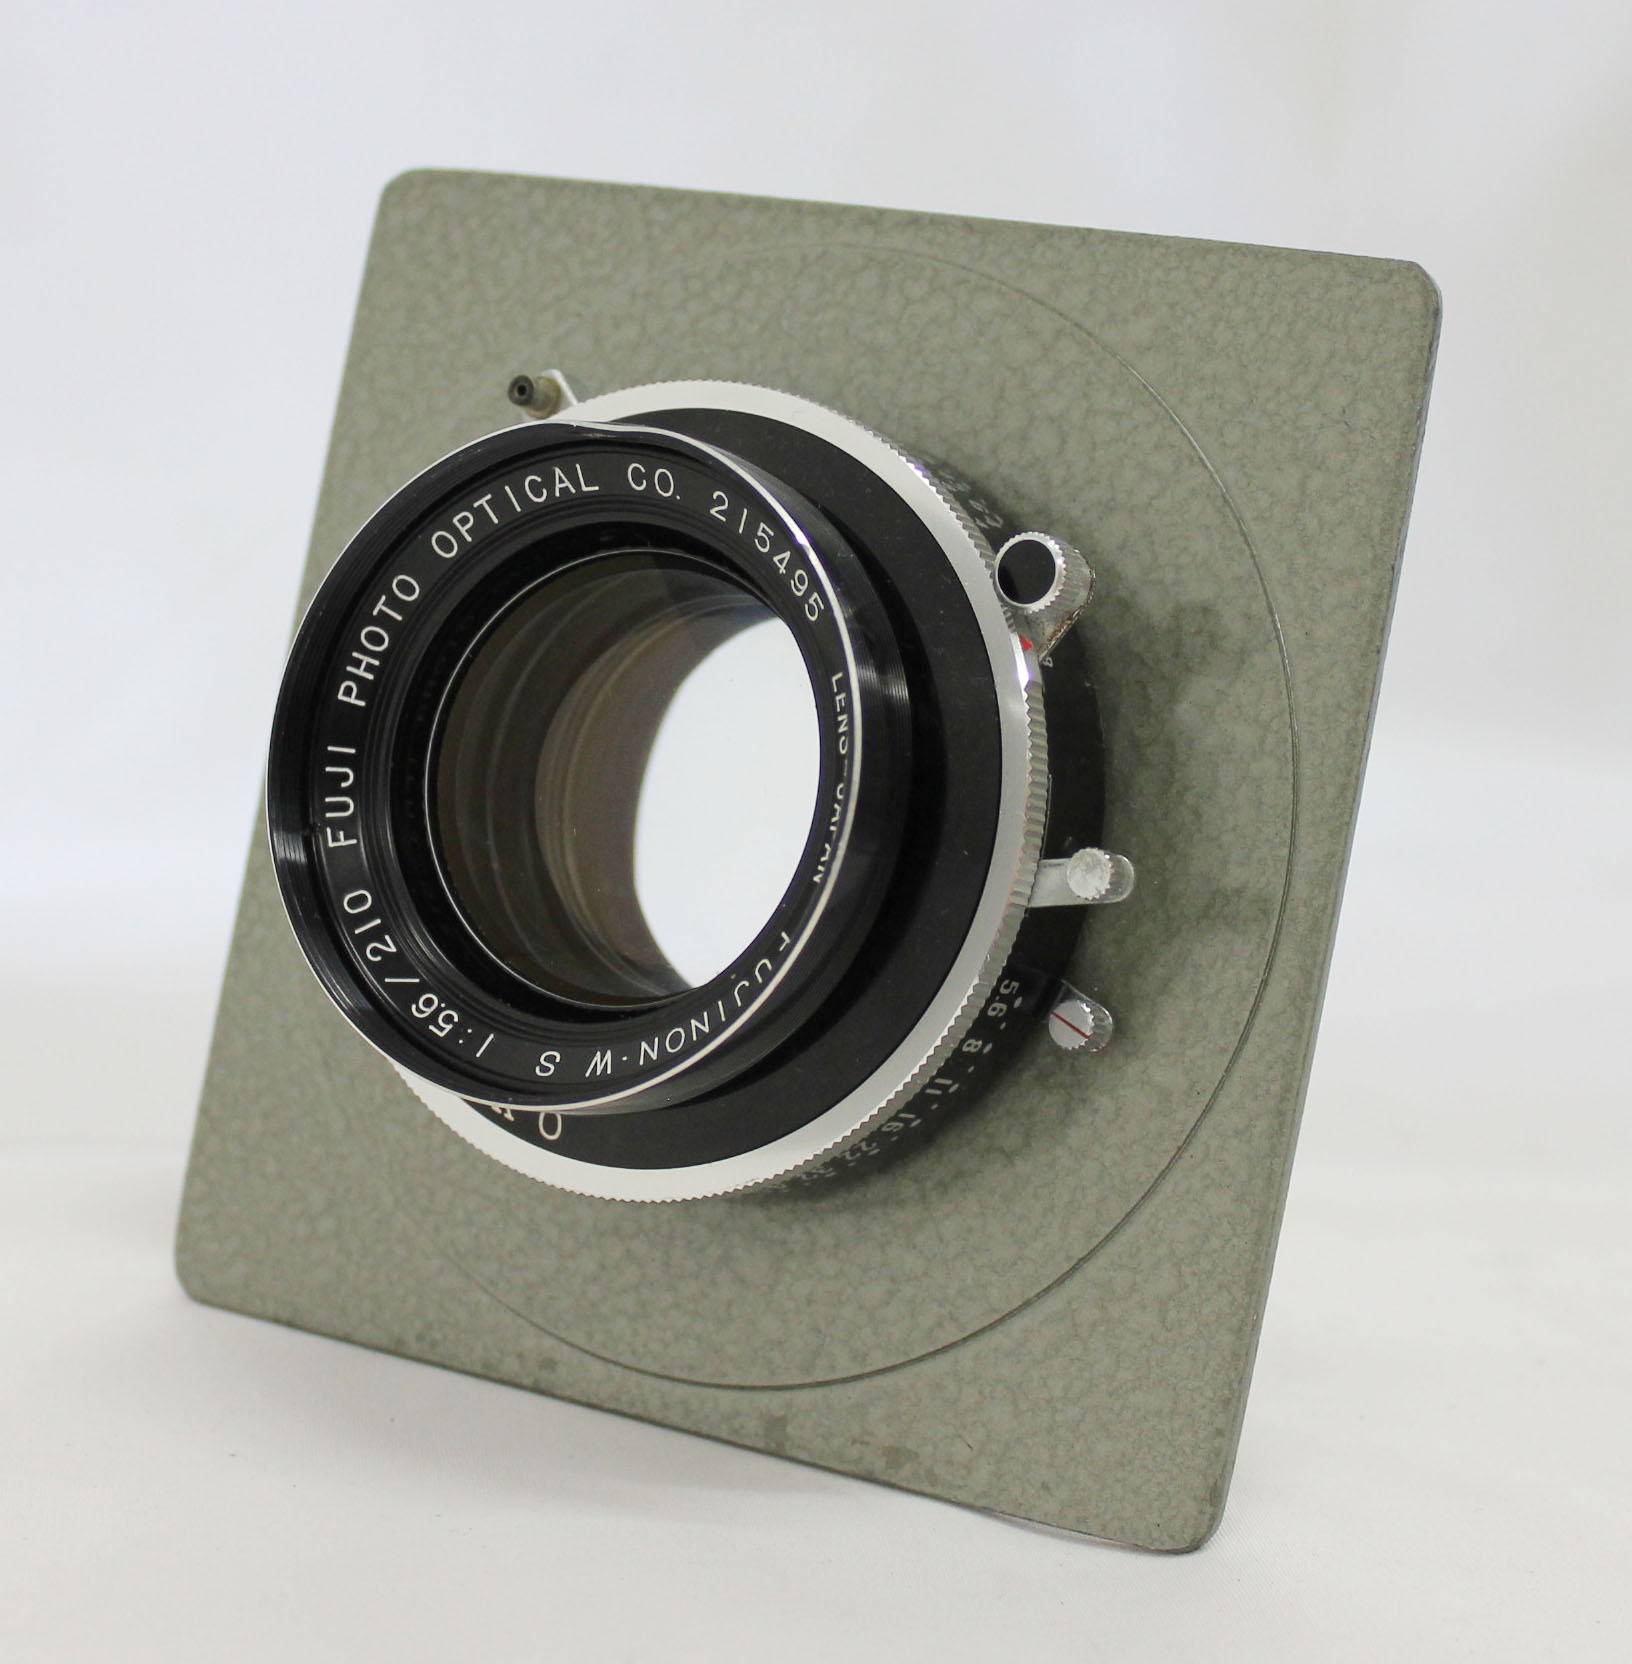 Japan Used Camera Shop | [Exc+++] Fuji Fujinon W S 210mm F/5.6 4x5 Large Format Lens with Seiko Shutter from Japan